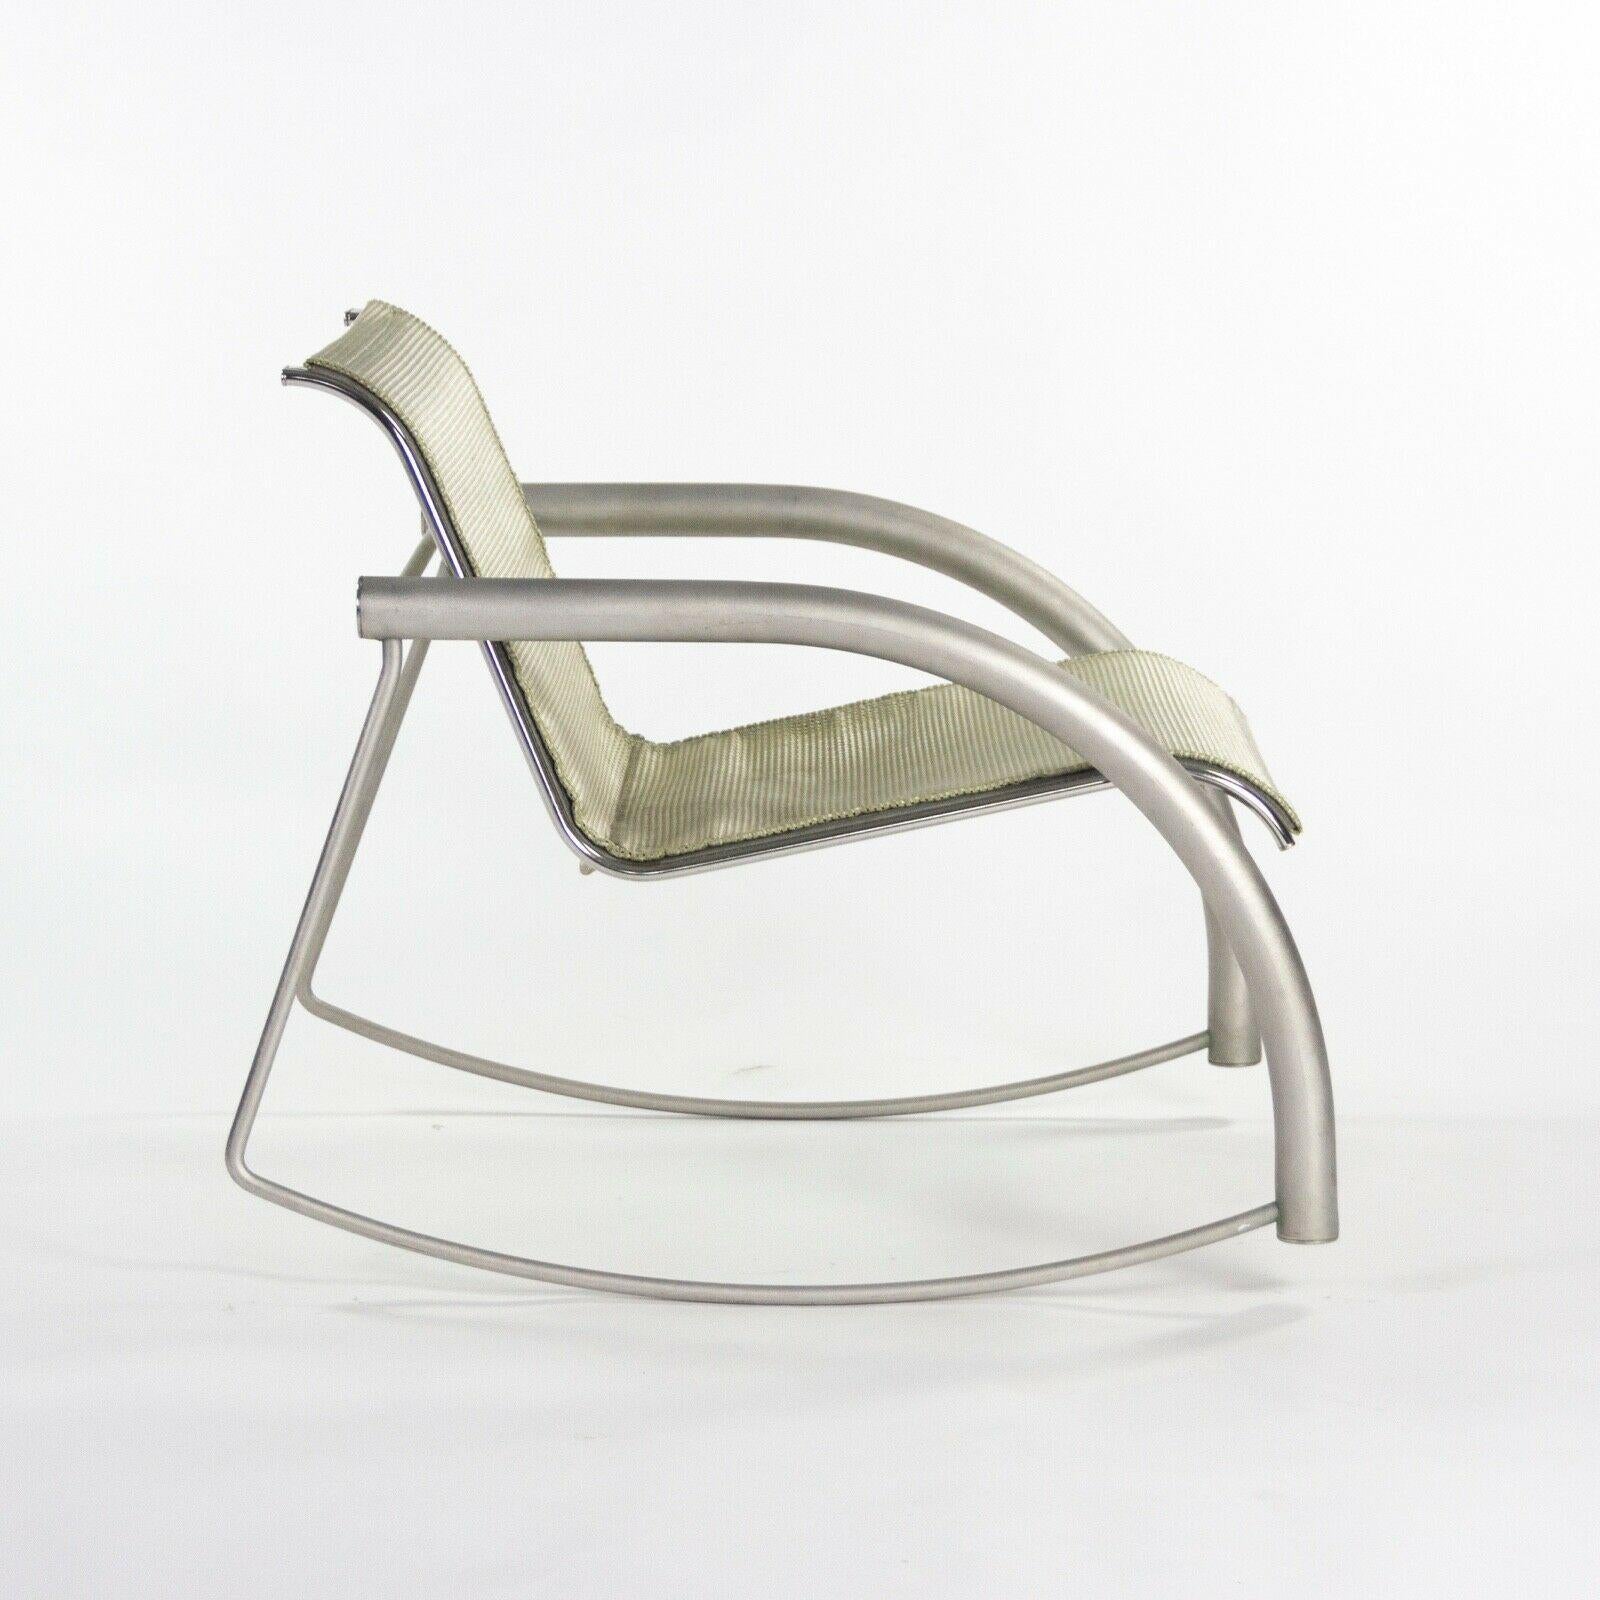 American Prototype Richard Schultz 2002 Collection Stainless Steel & Mesh Rocking Chair For Sale